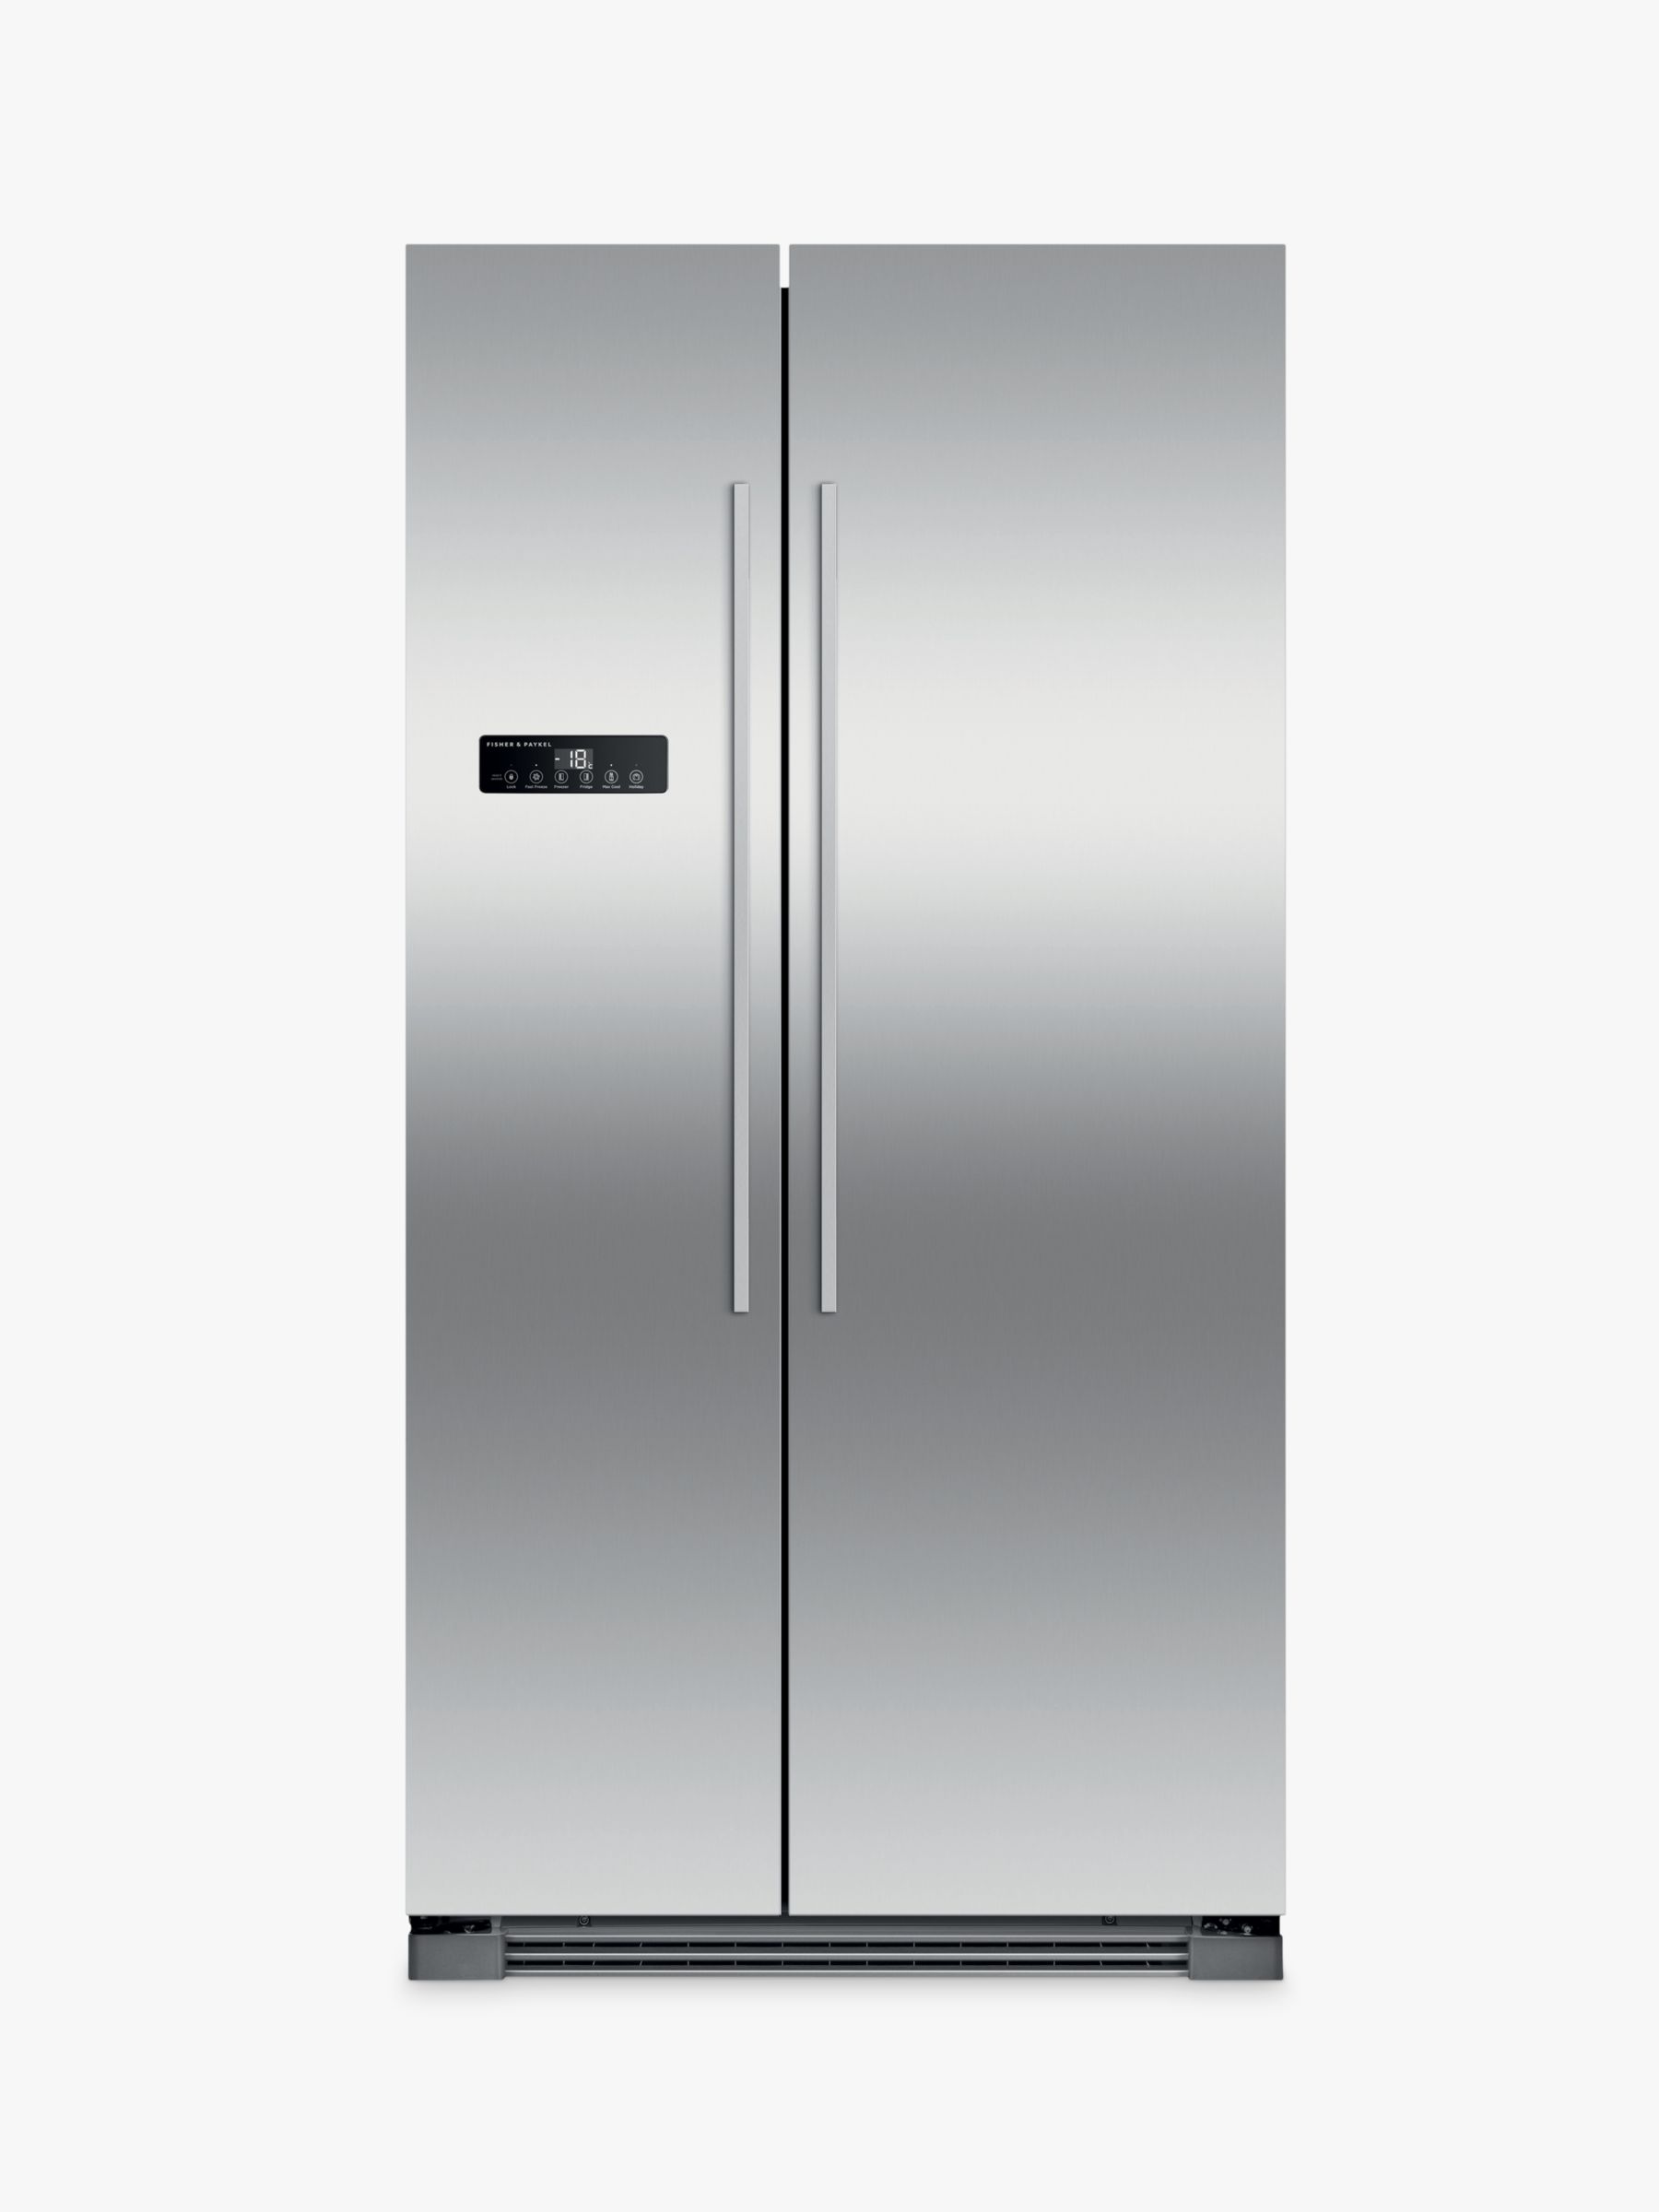 Fisher & Paykel RX628D American Style Fridge Freezer Review thumbnail